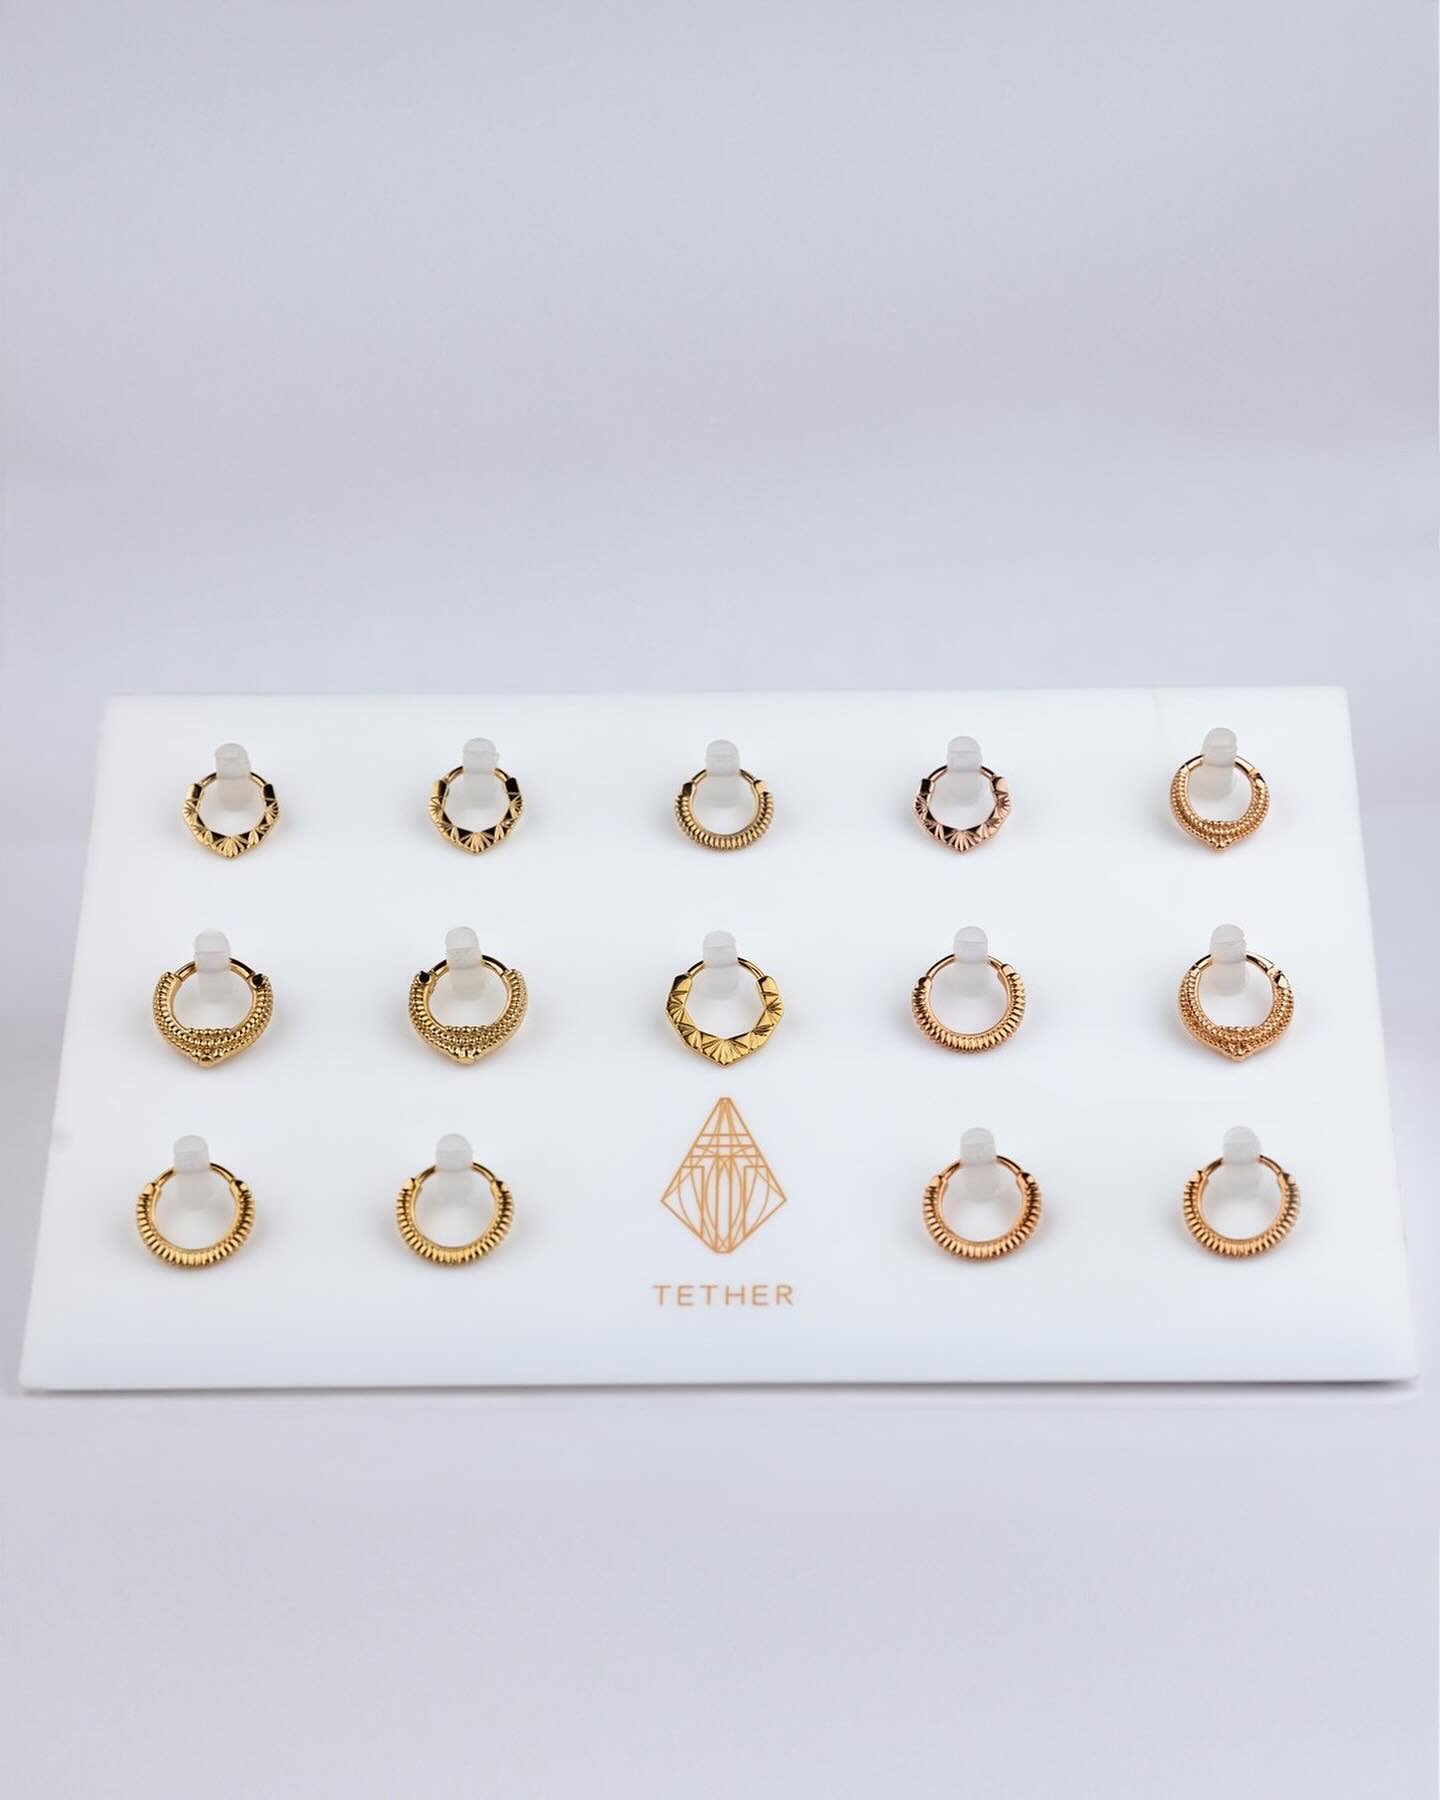 HERE BEFORE✨
 
YOUR EYES 
 
Something to always look forward to when getting some types of piercings is a ring-and these clickers from Tether are right up there as some fun options for septums, daiths, and some other fun placements once the healing i